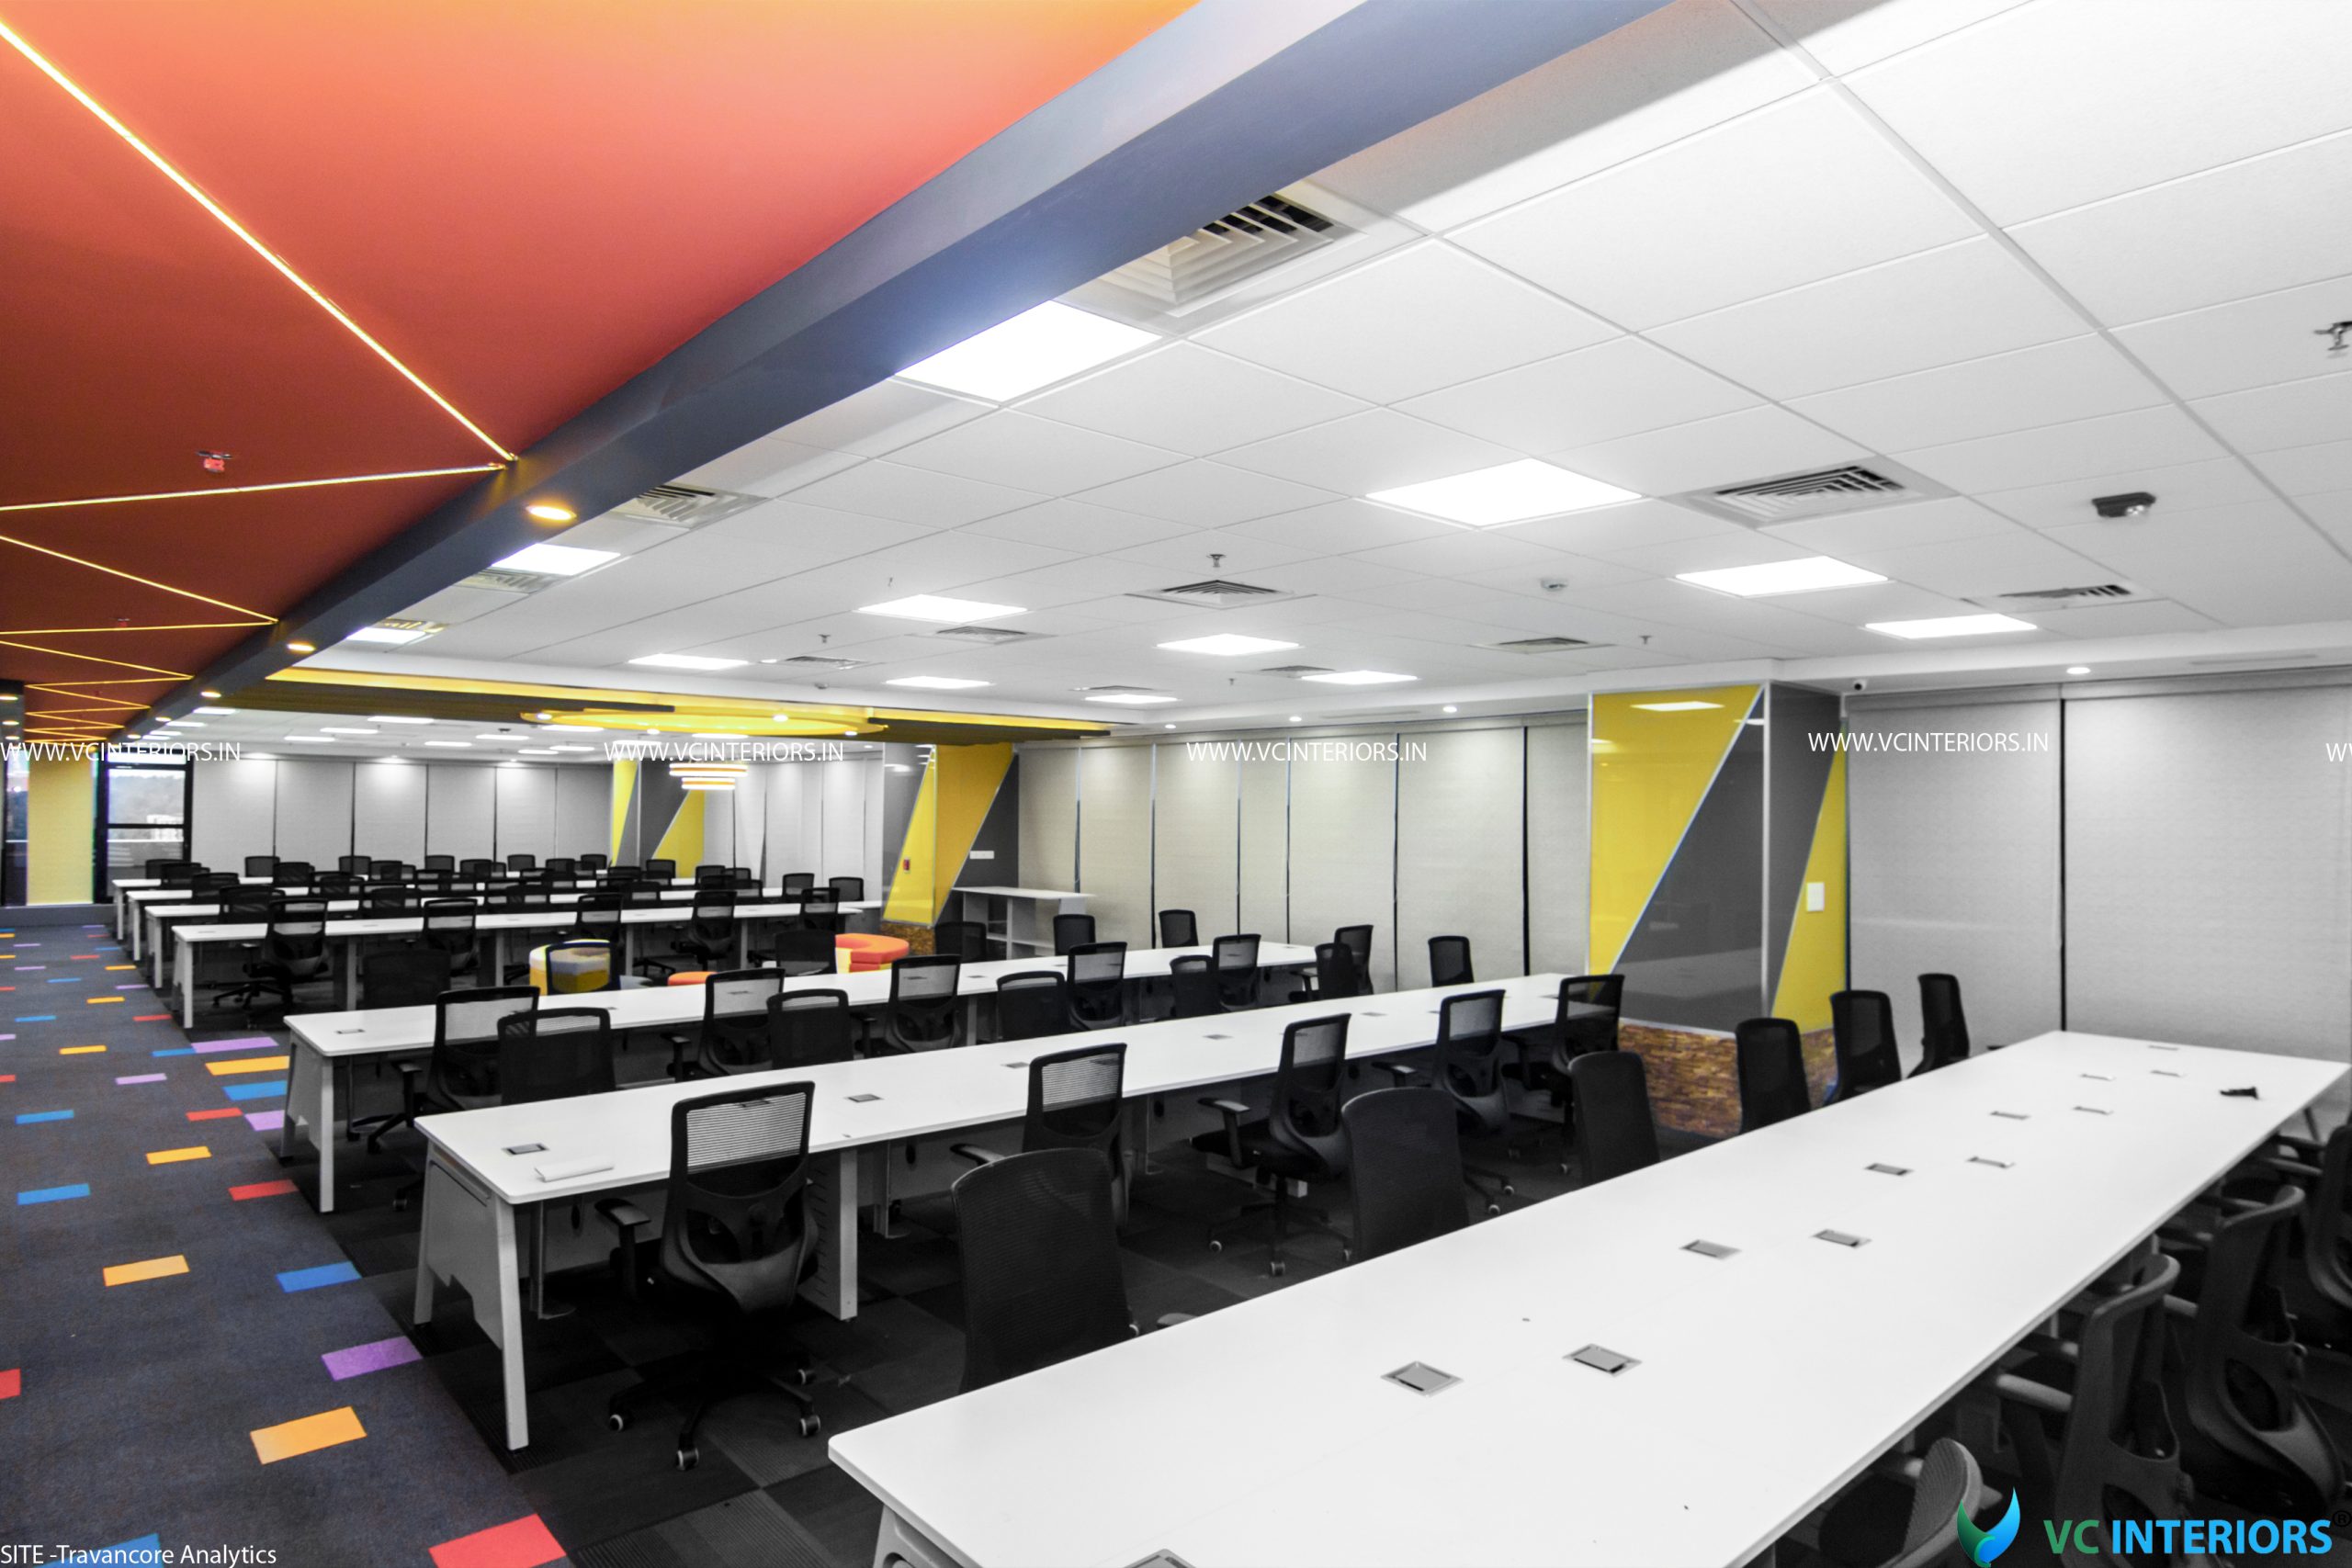 Office Space Design - VC Interiors